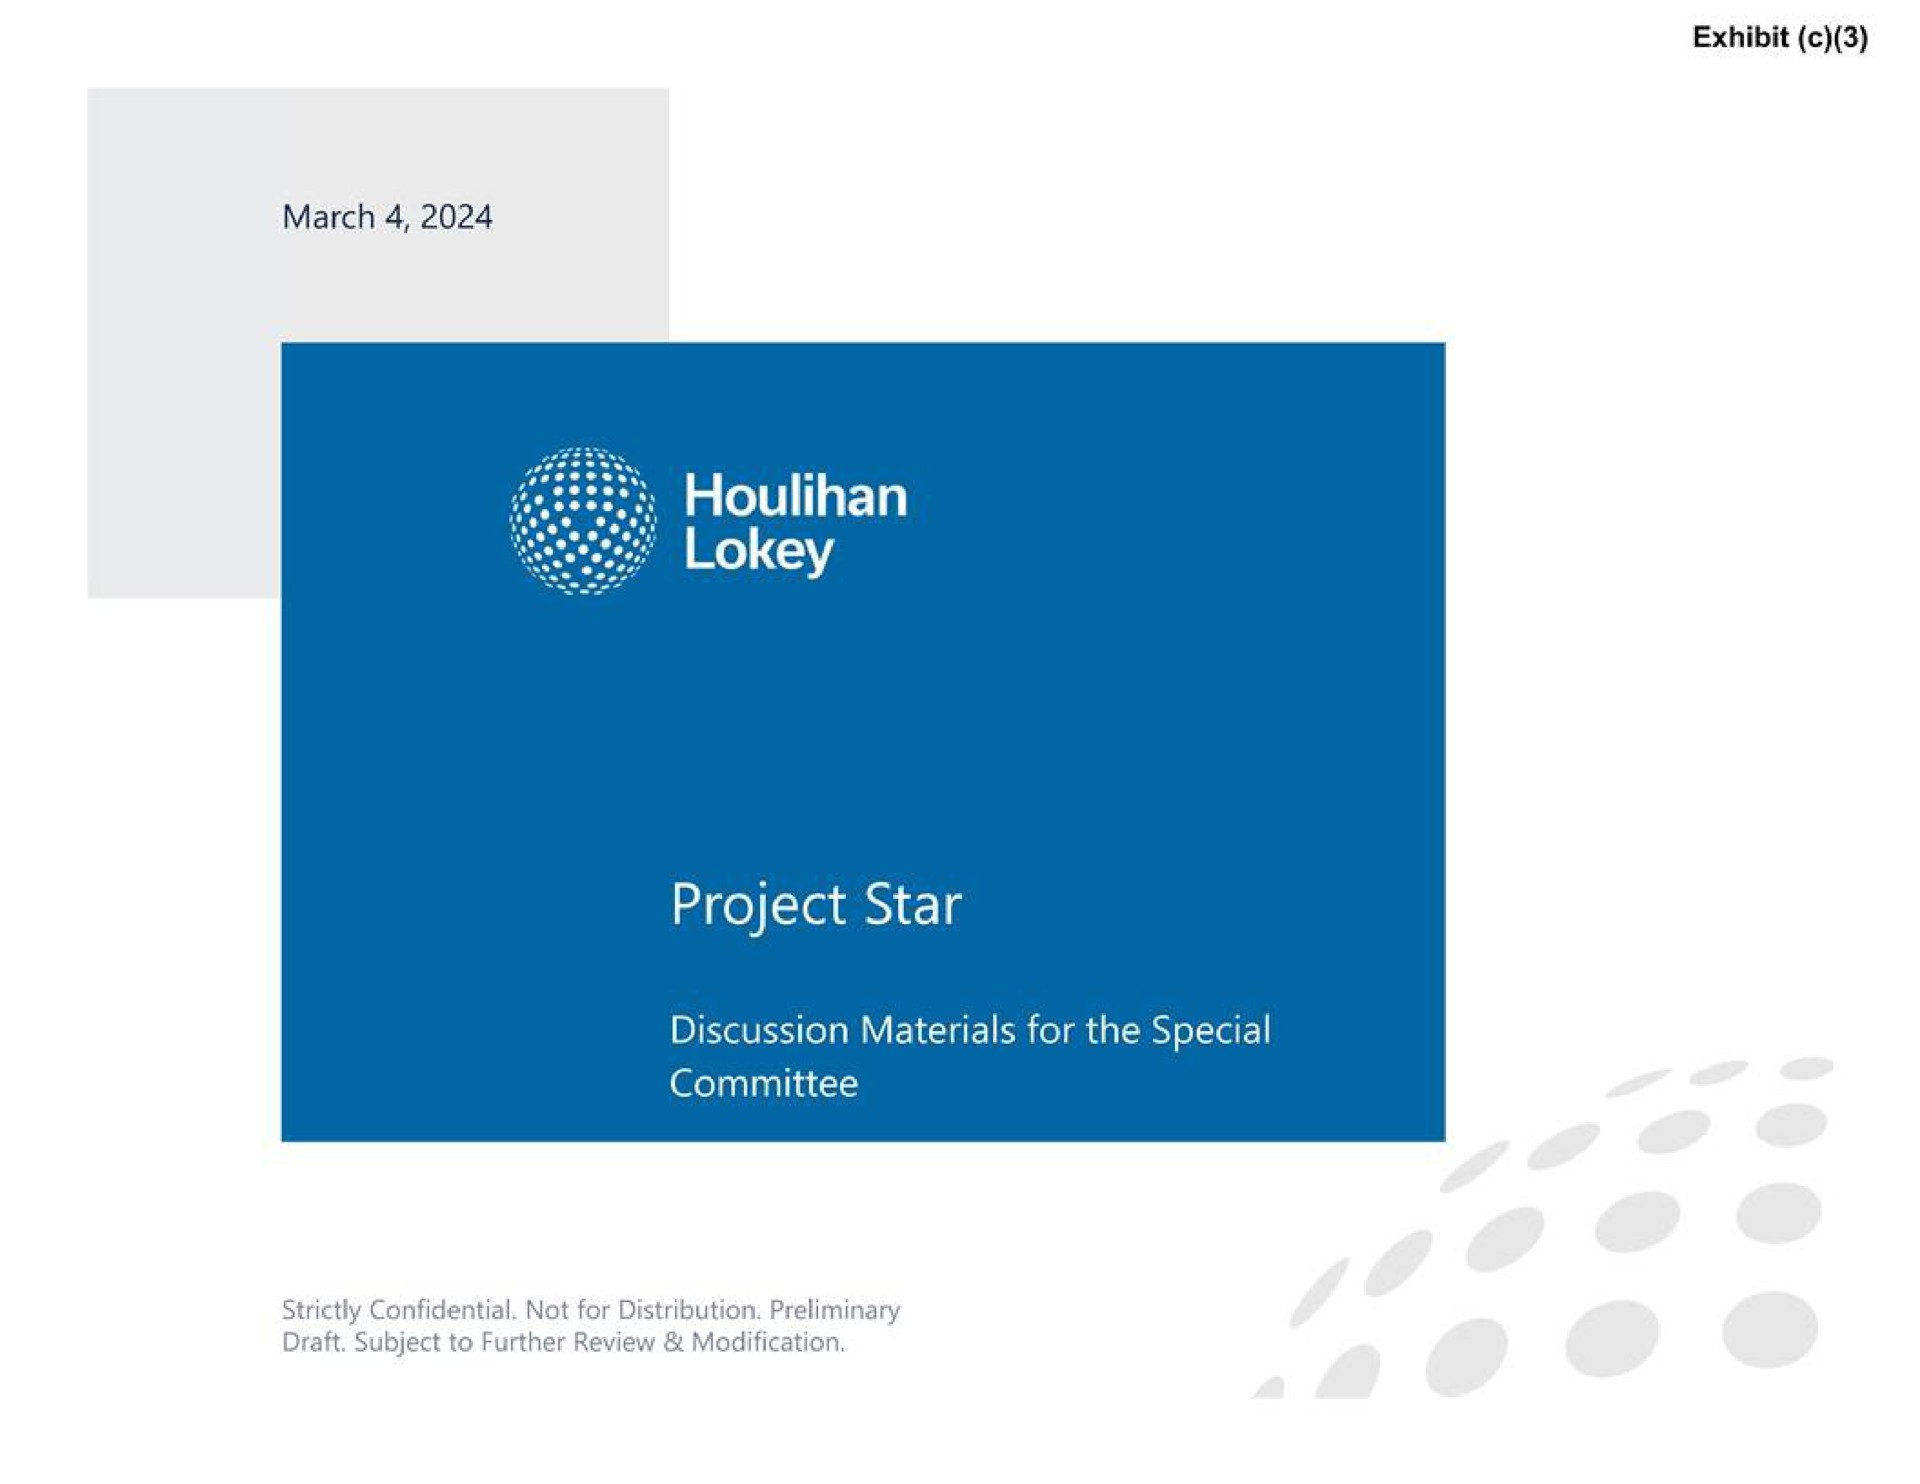 exhibit elt went committee discussion materials for the special project star | Houlihan Lokey